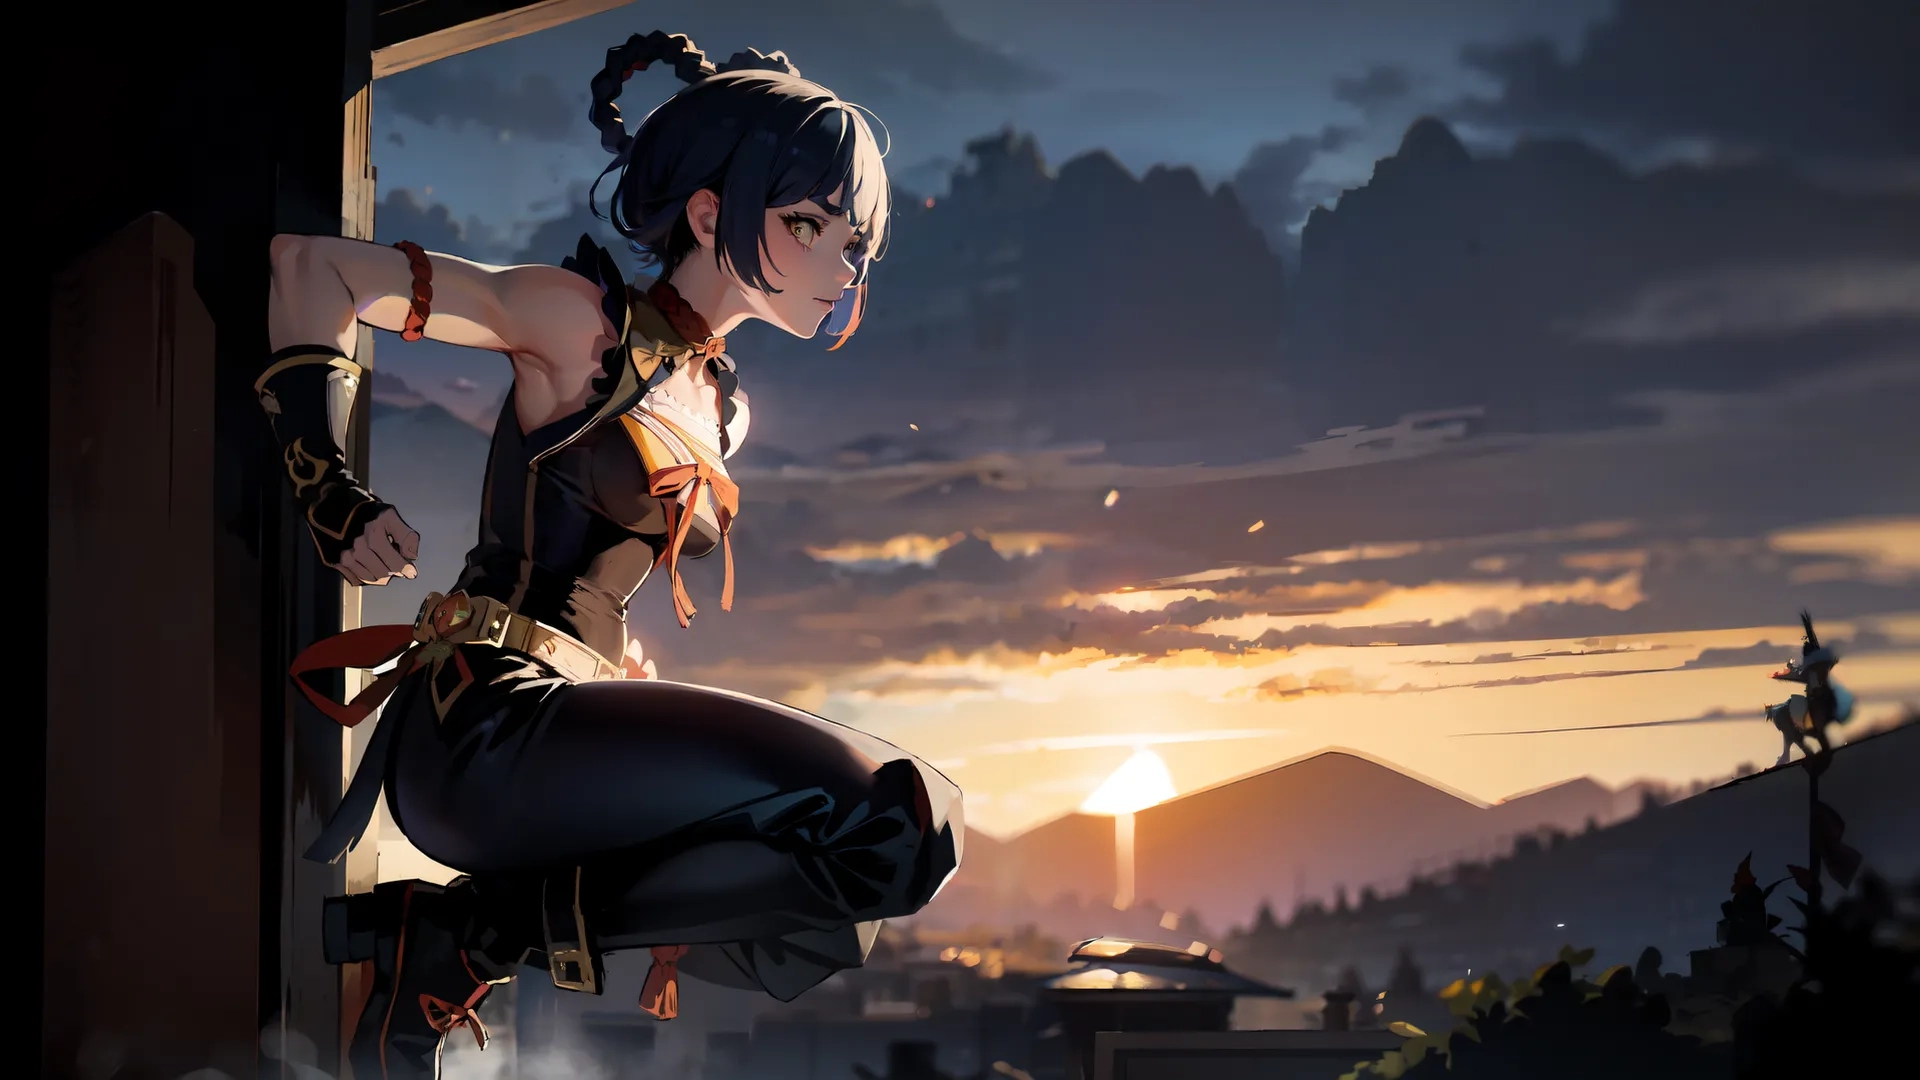 anime woman outside window staring at sunset during storm clouds are coming, with sun and city in the background from dark haired lady like her
